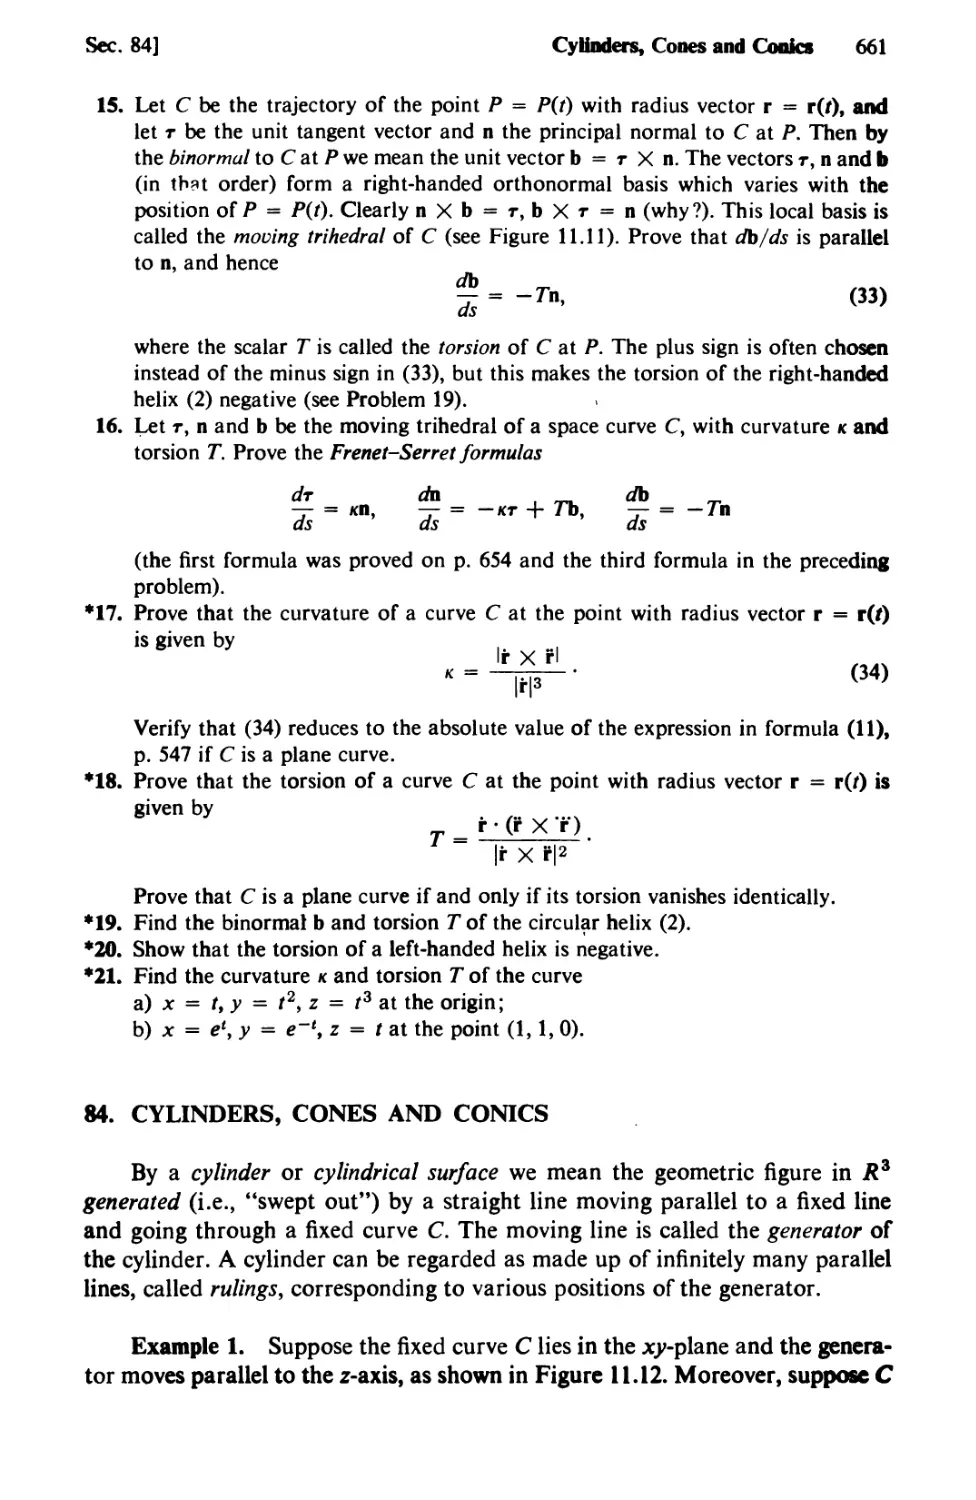 84. Cylinders, Cones and Conics